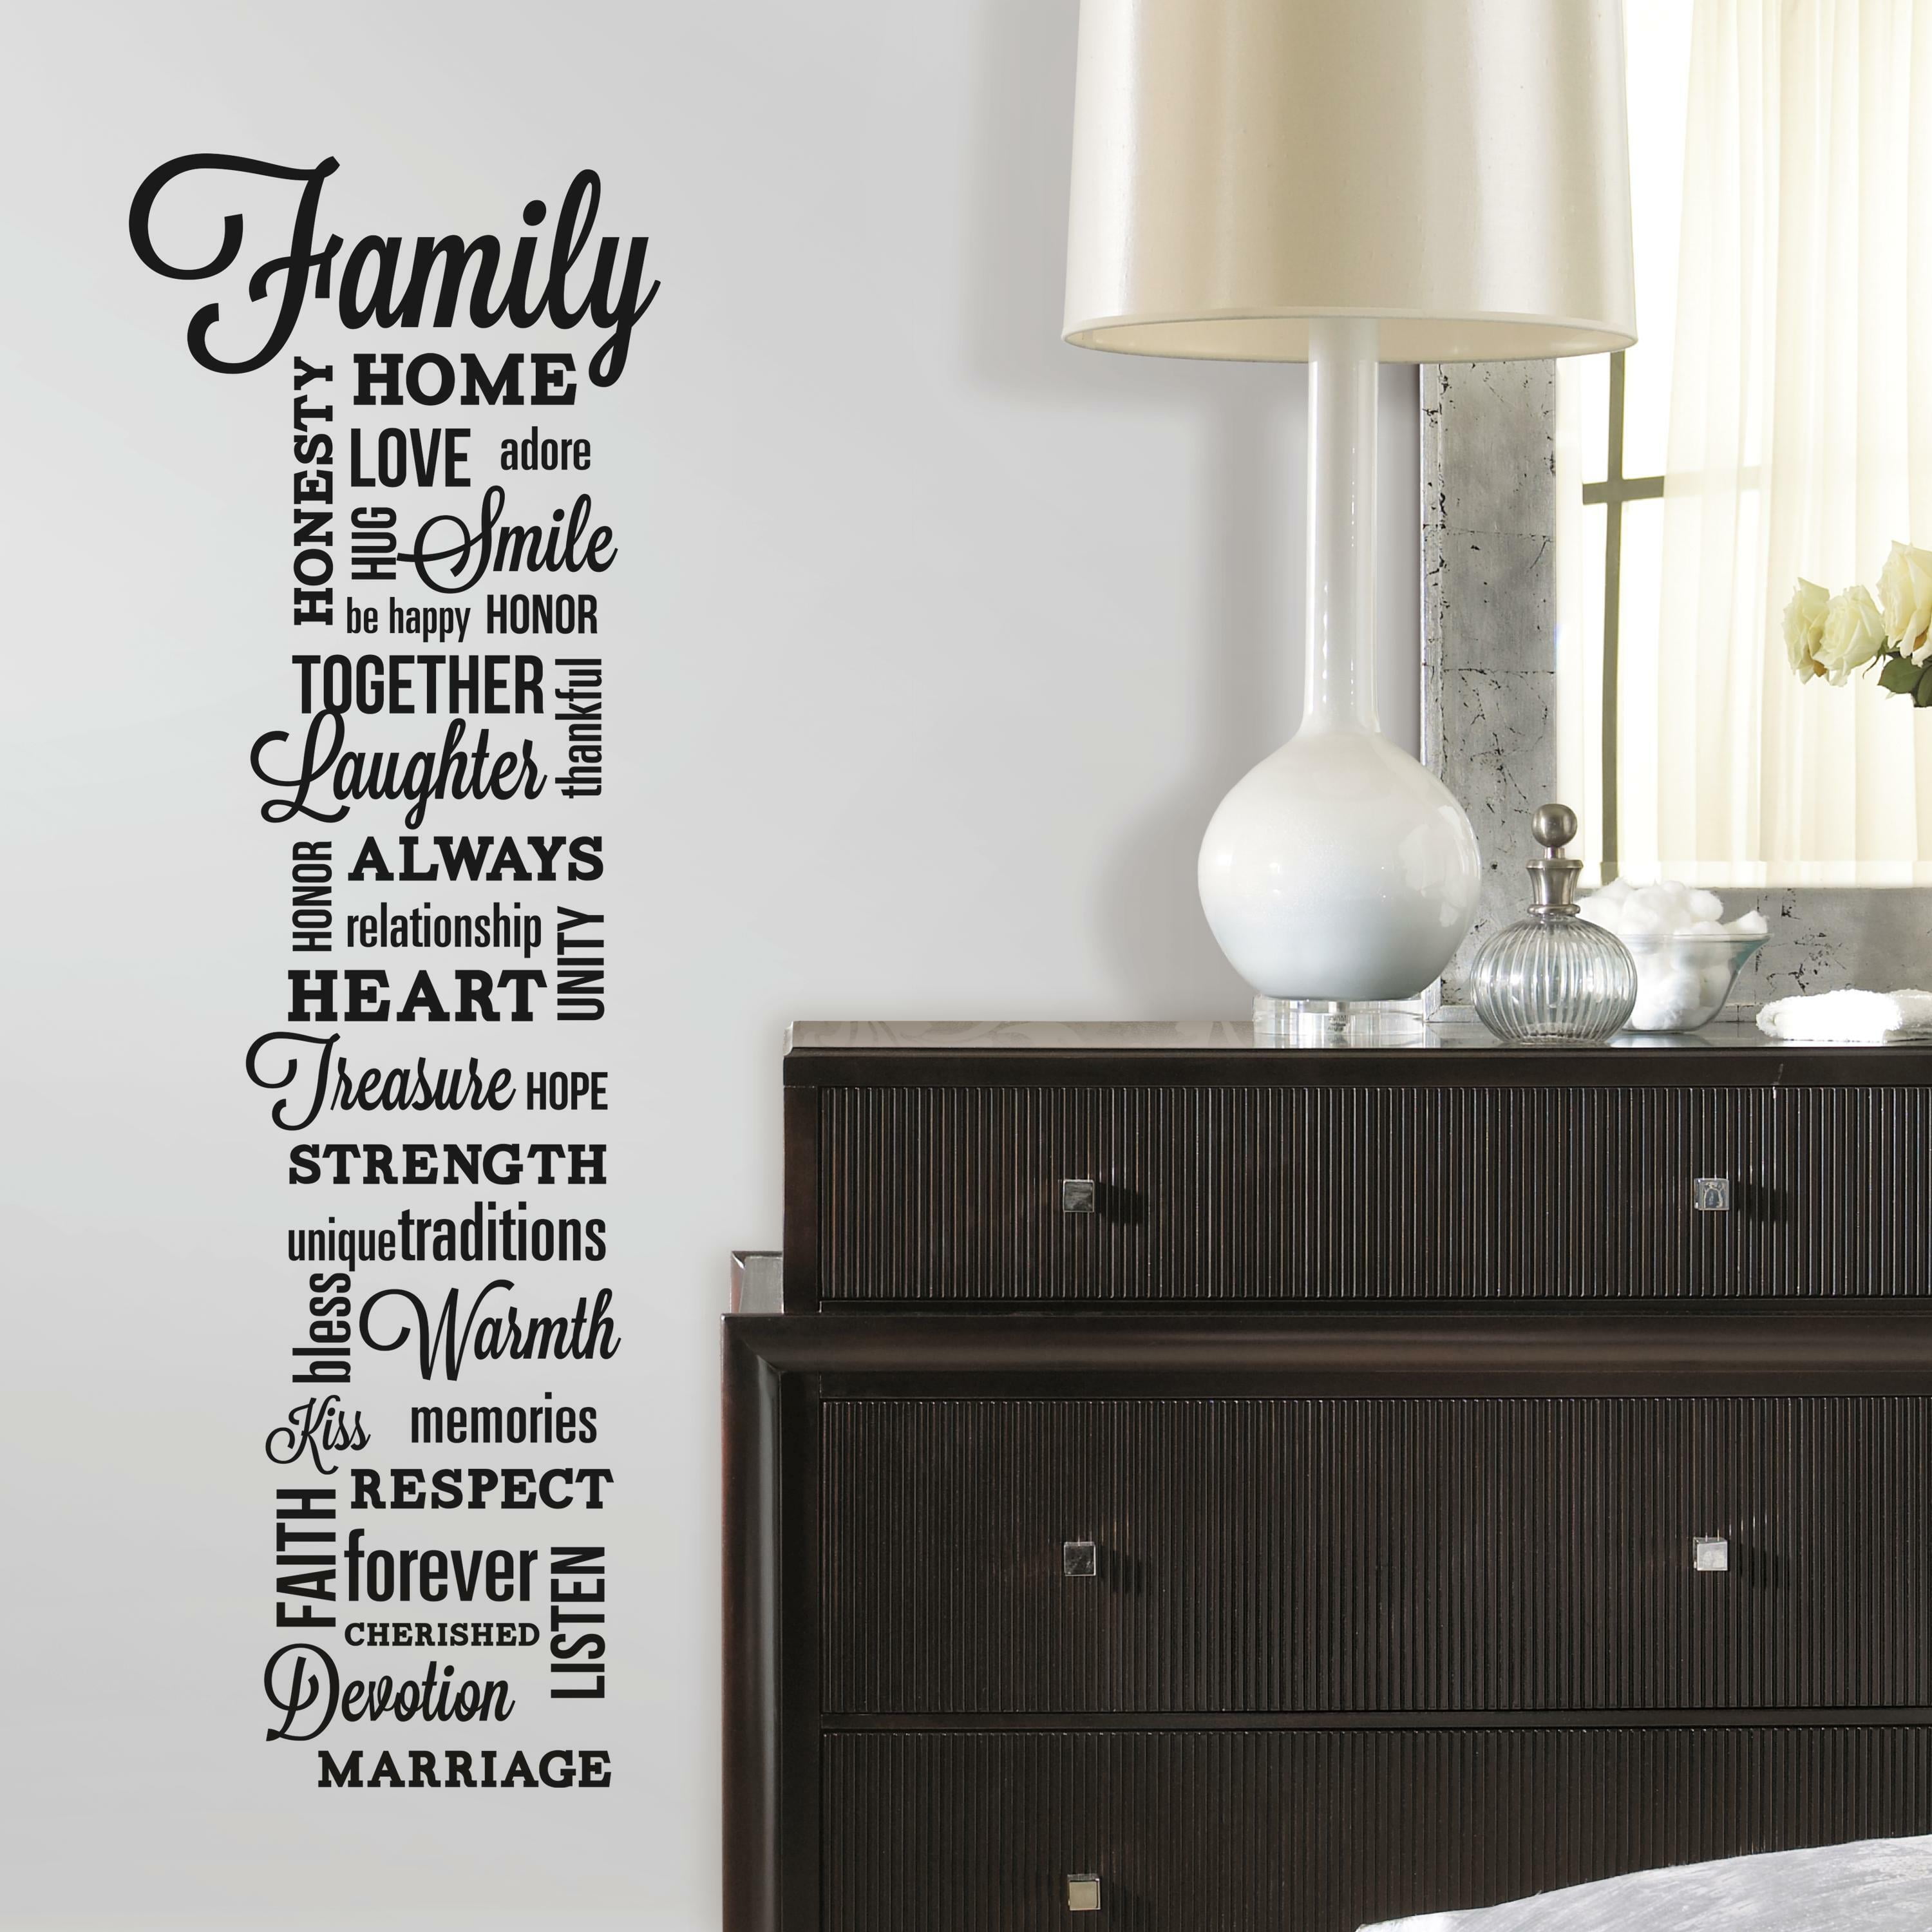 20 x 40 Design with Vinyl Moti 1988 3 Family Inspirational Life Quote Living Room Bedroom Peel & Stick Wall Sticker Decal Black